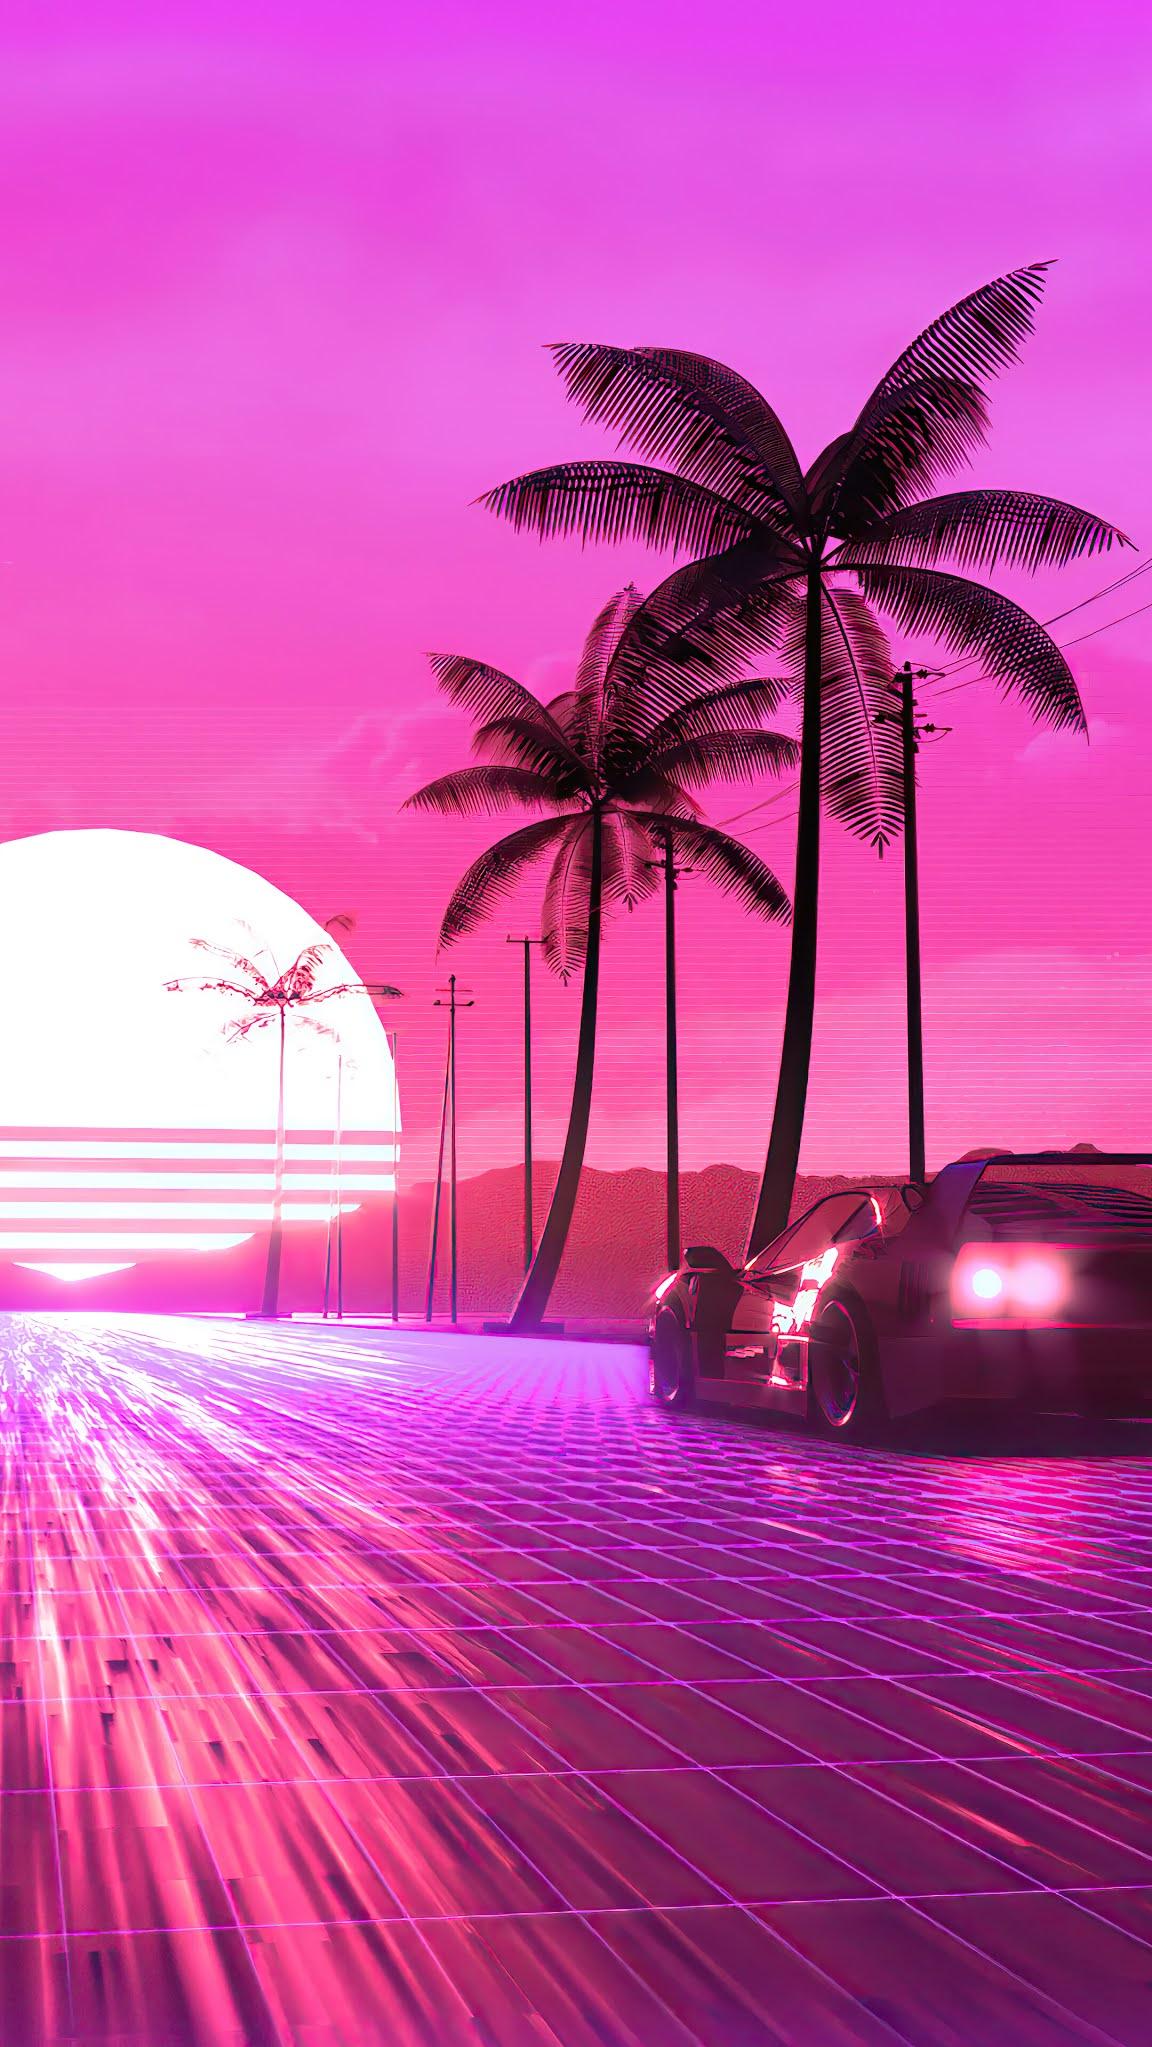 Car Outrun Synthwave Scenery Digital Art Mobile Wallpaper HD